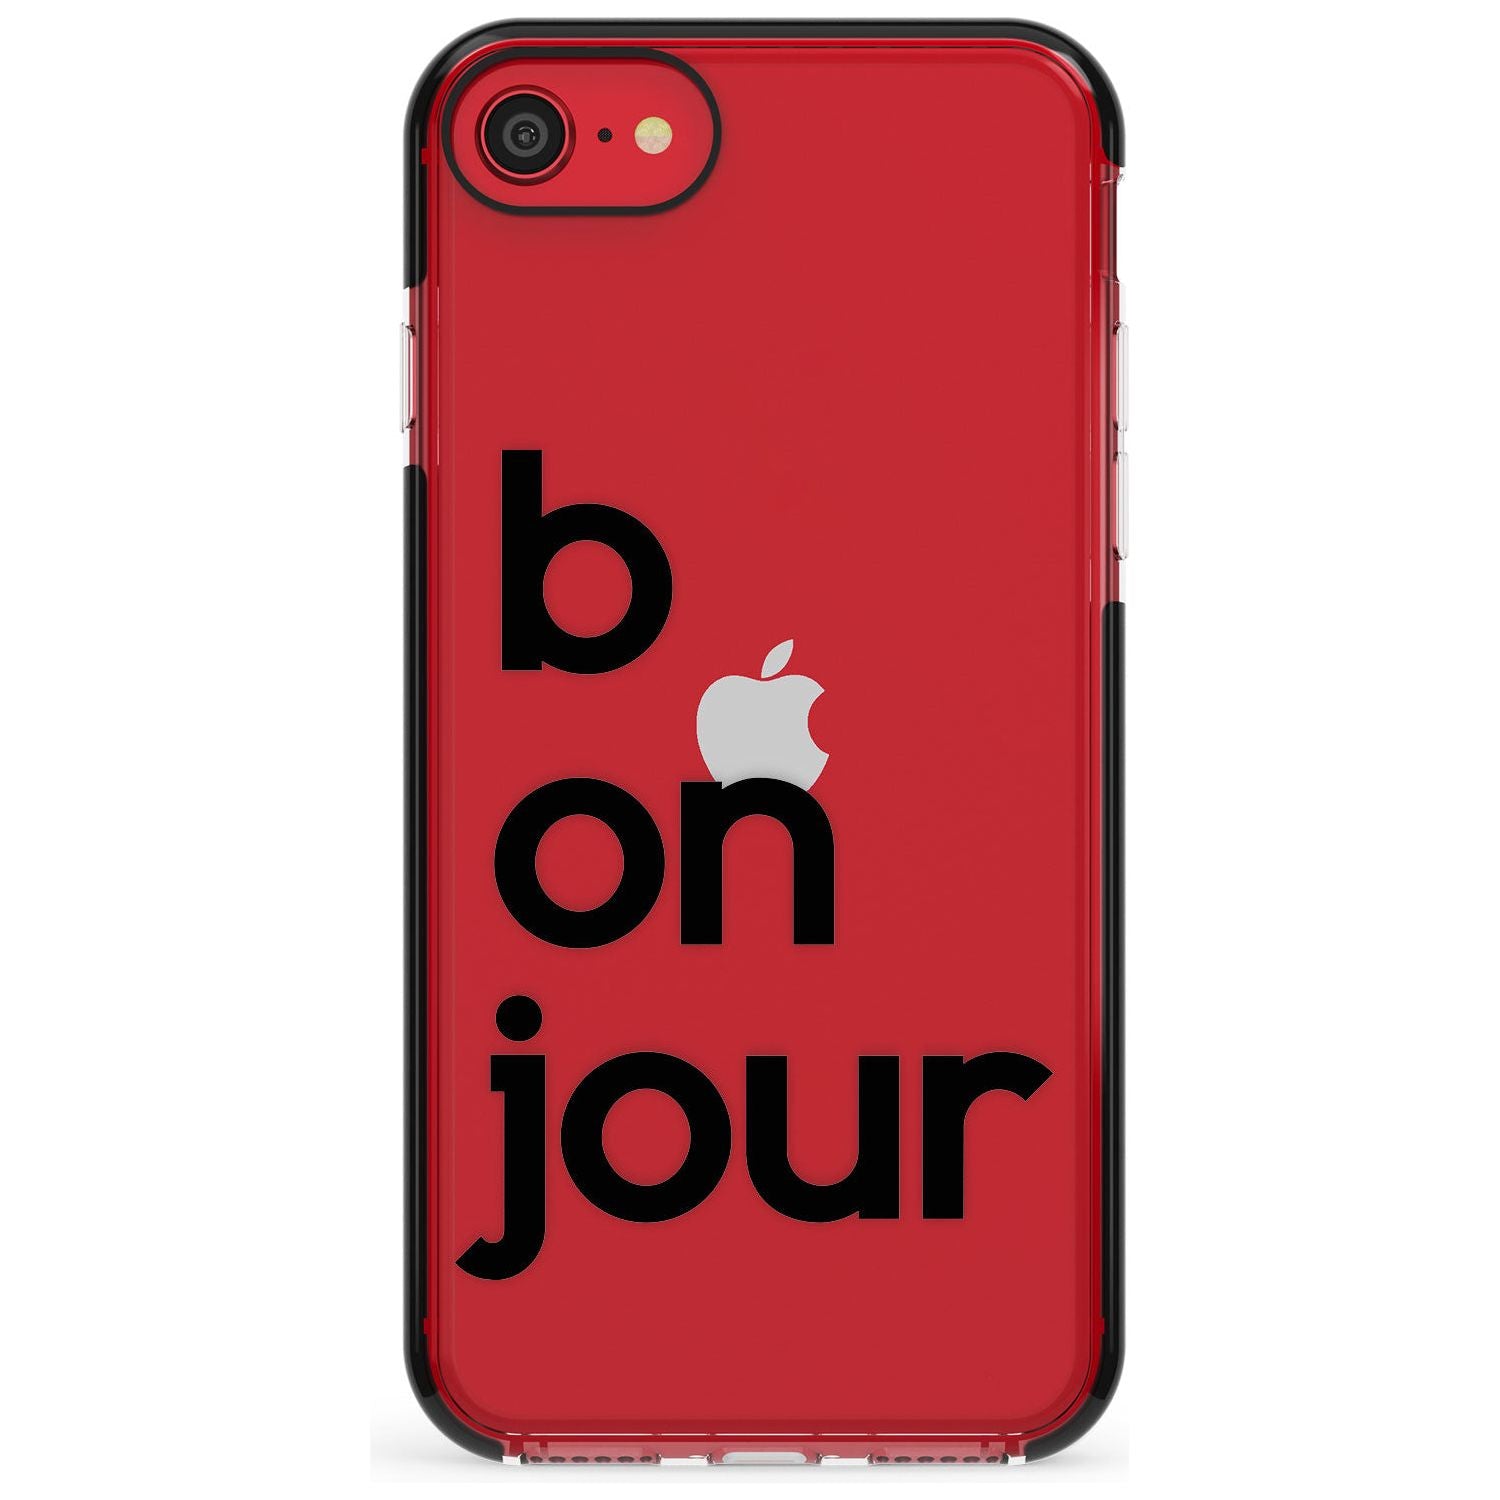 Bonjour Pink Fade Impact Phone Case for iPhone SE 8 7 Plus